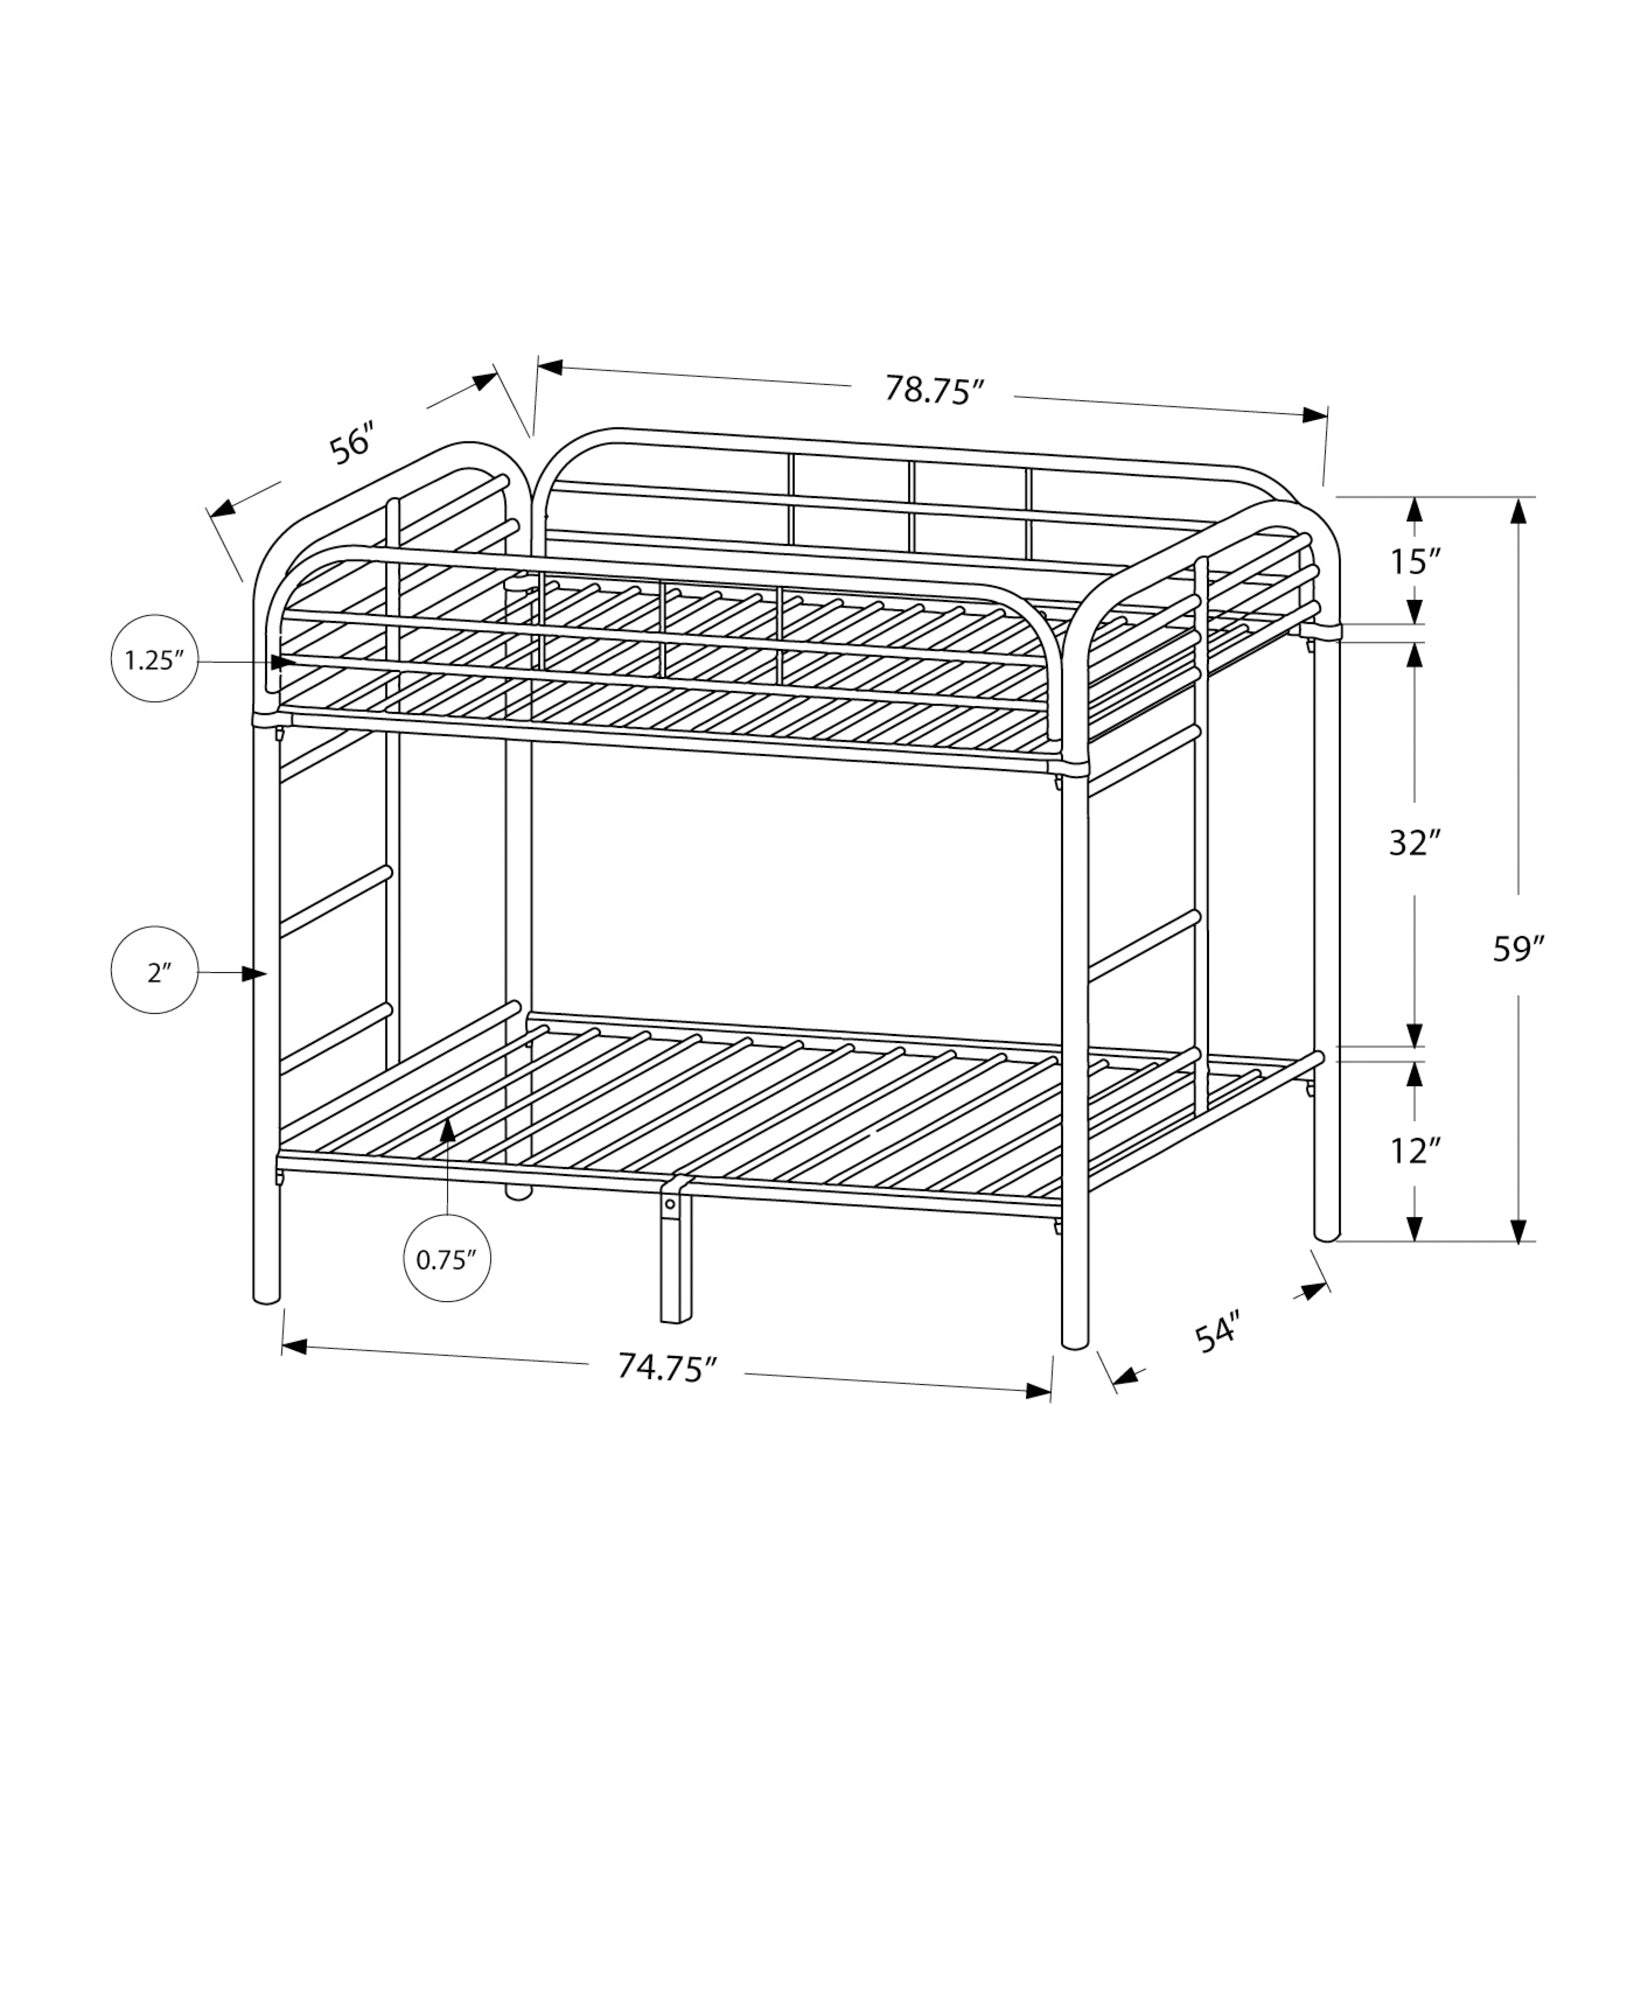 Bunk Bed - Full / Full Size / Silver Metal